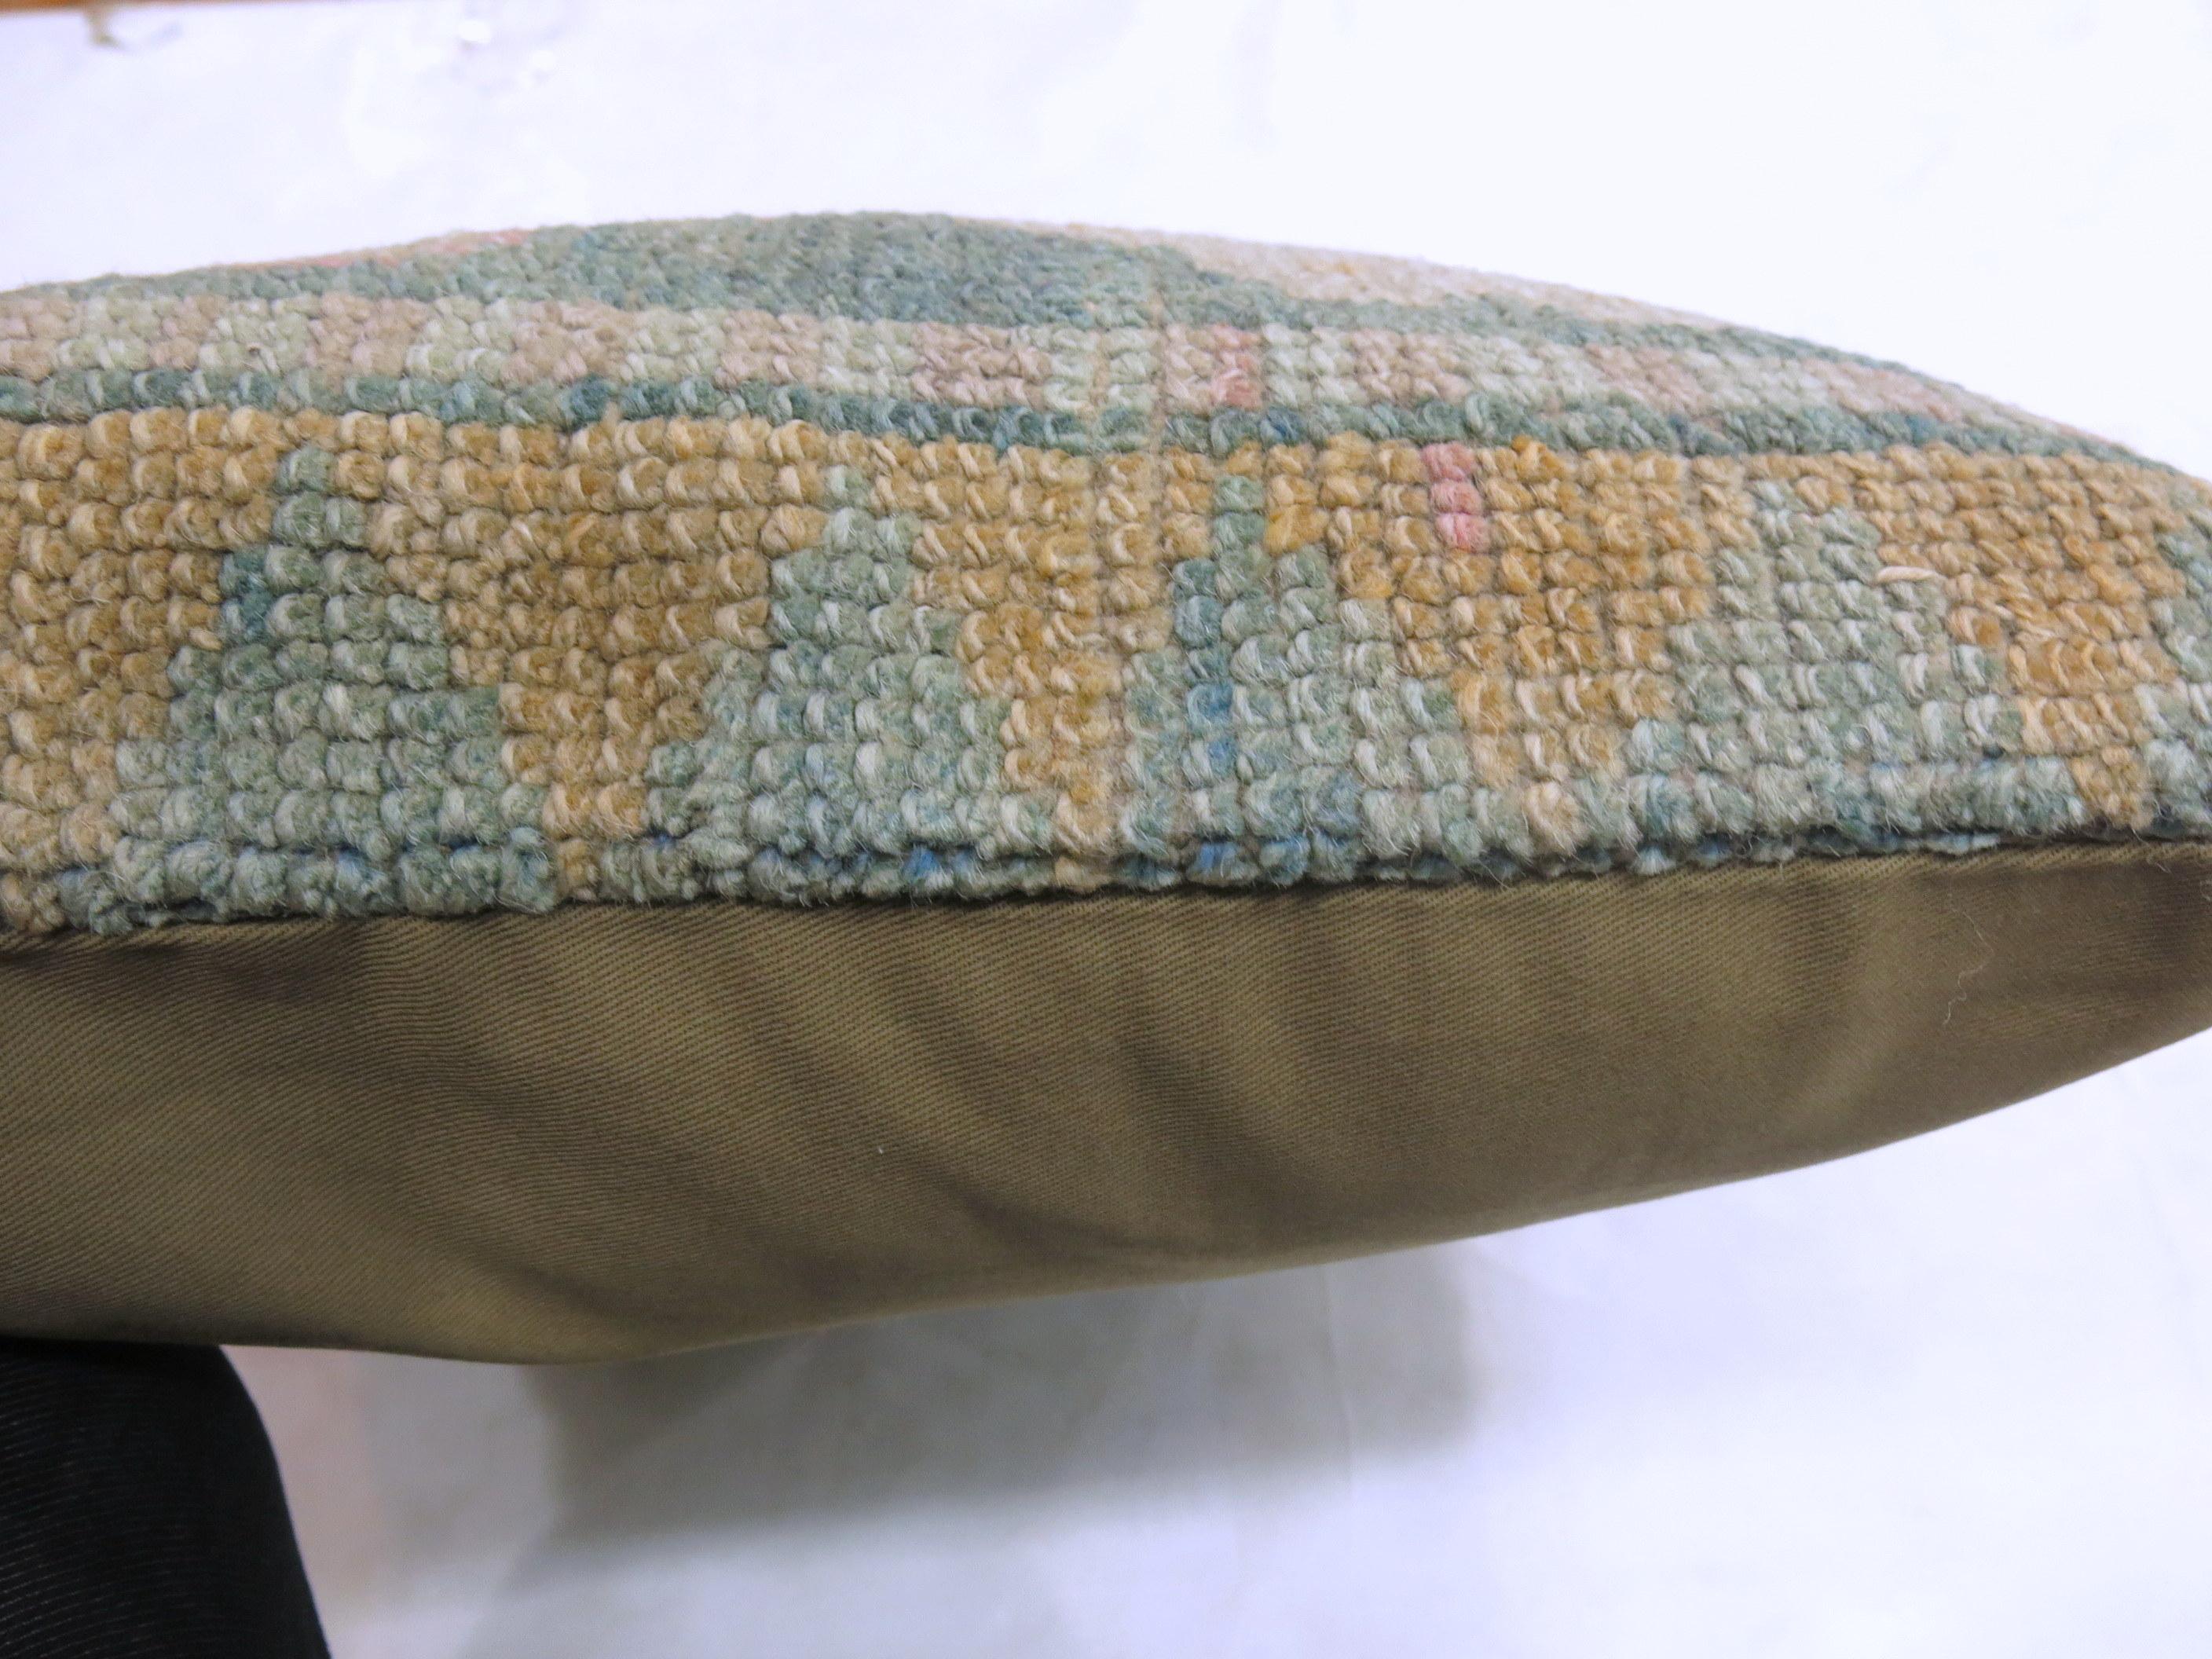 Square pillow made from a border of vintage Turkish rug. Measures: 20” x 20”. Pops of predominantly teal, pink, beige.